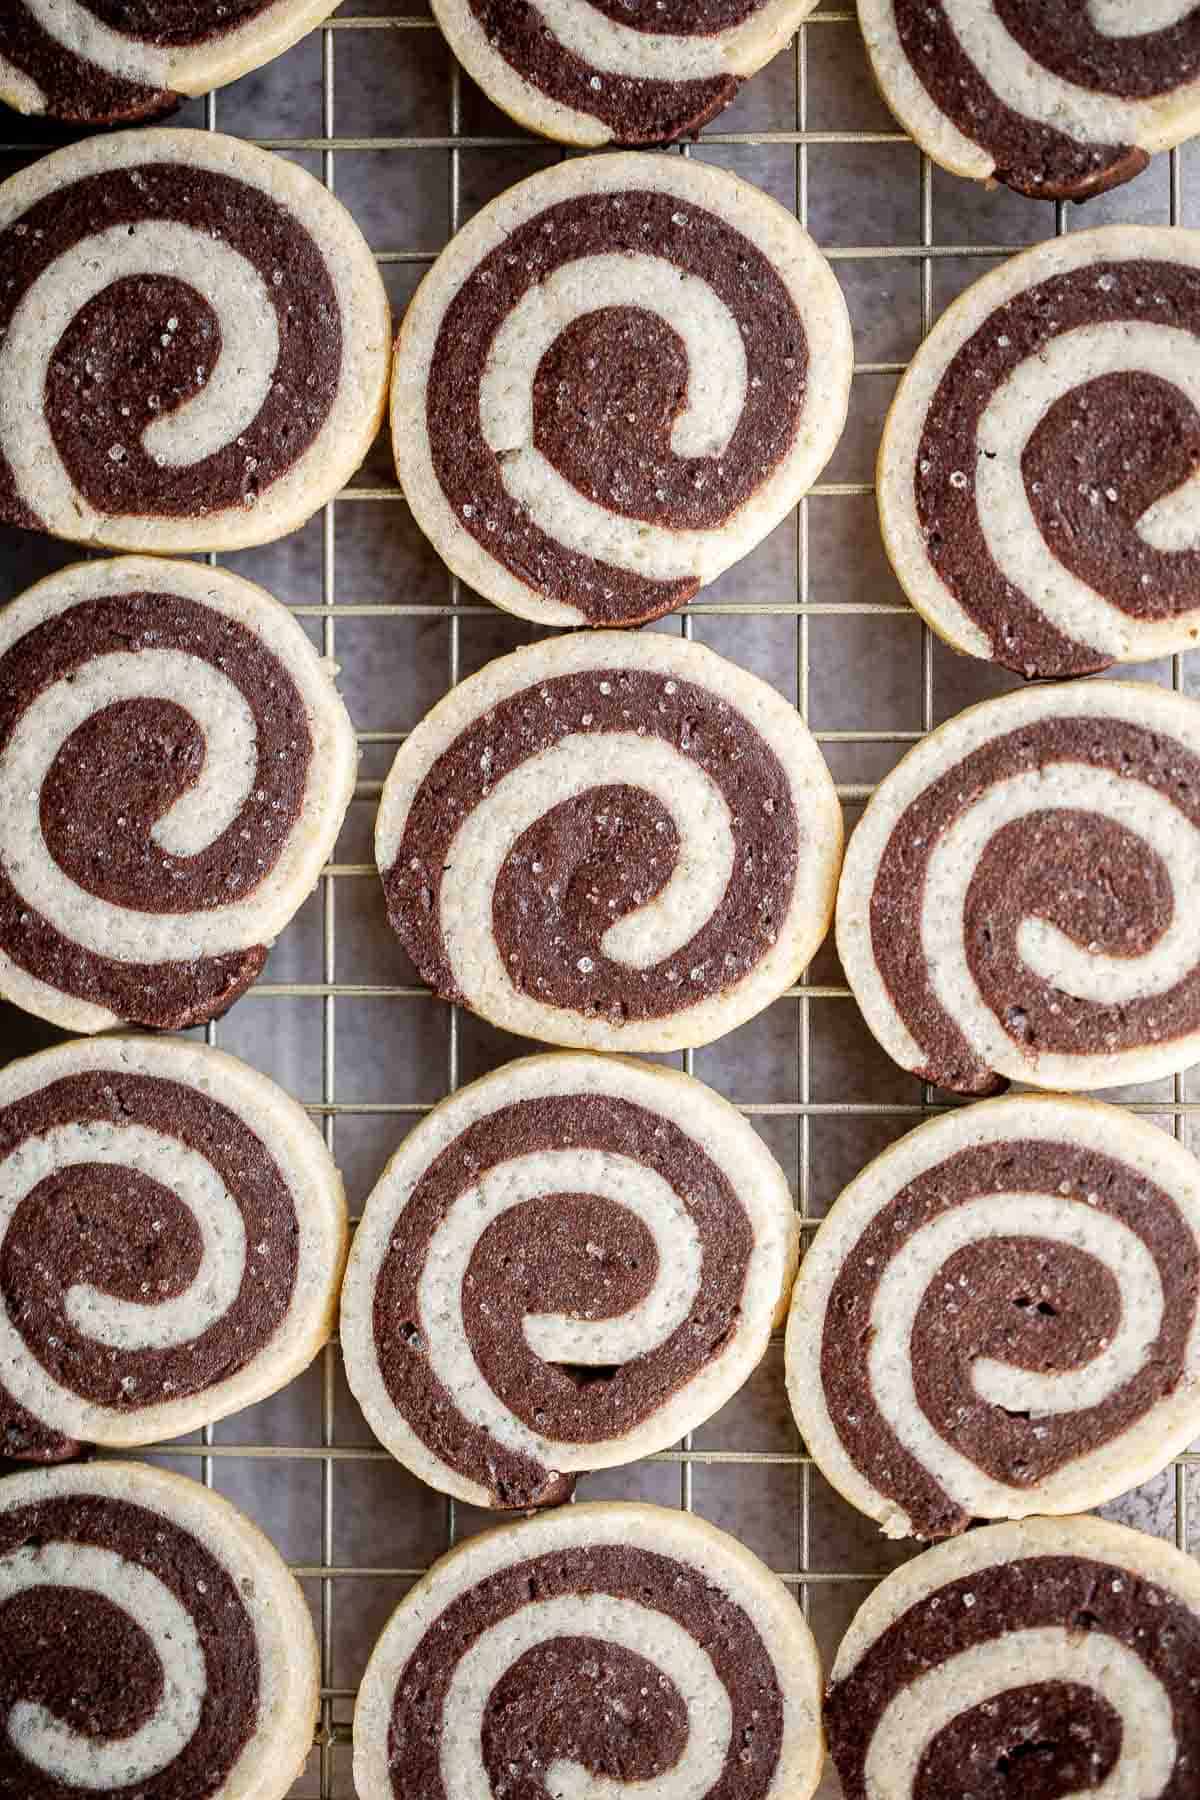 Chocolate Pinwheel Cookies are a Christmastime classic — sweet, buttery, and melt in your mouth delicious. Plus, an easy to make slice-and-bake cookie. | aheadofthyme.com